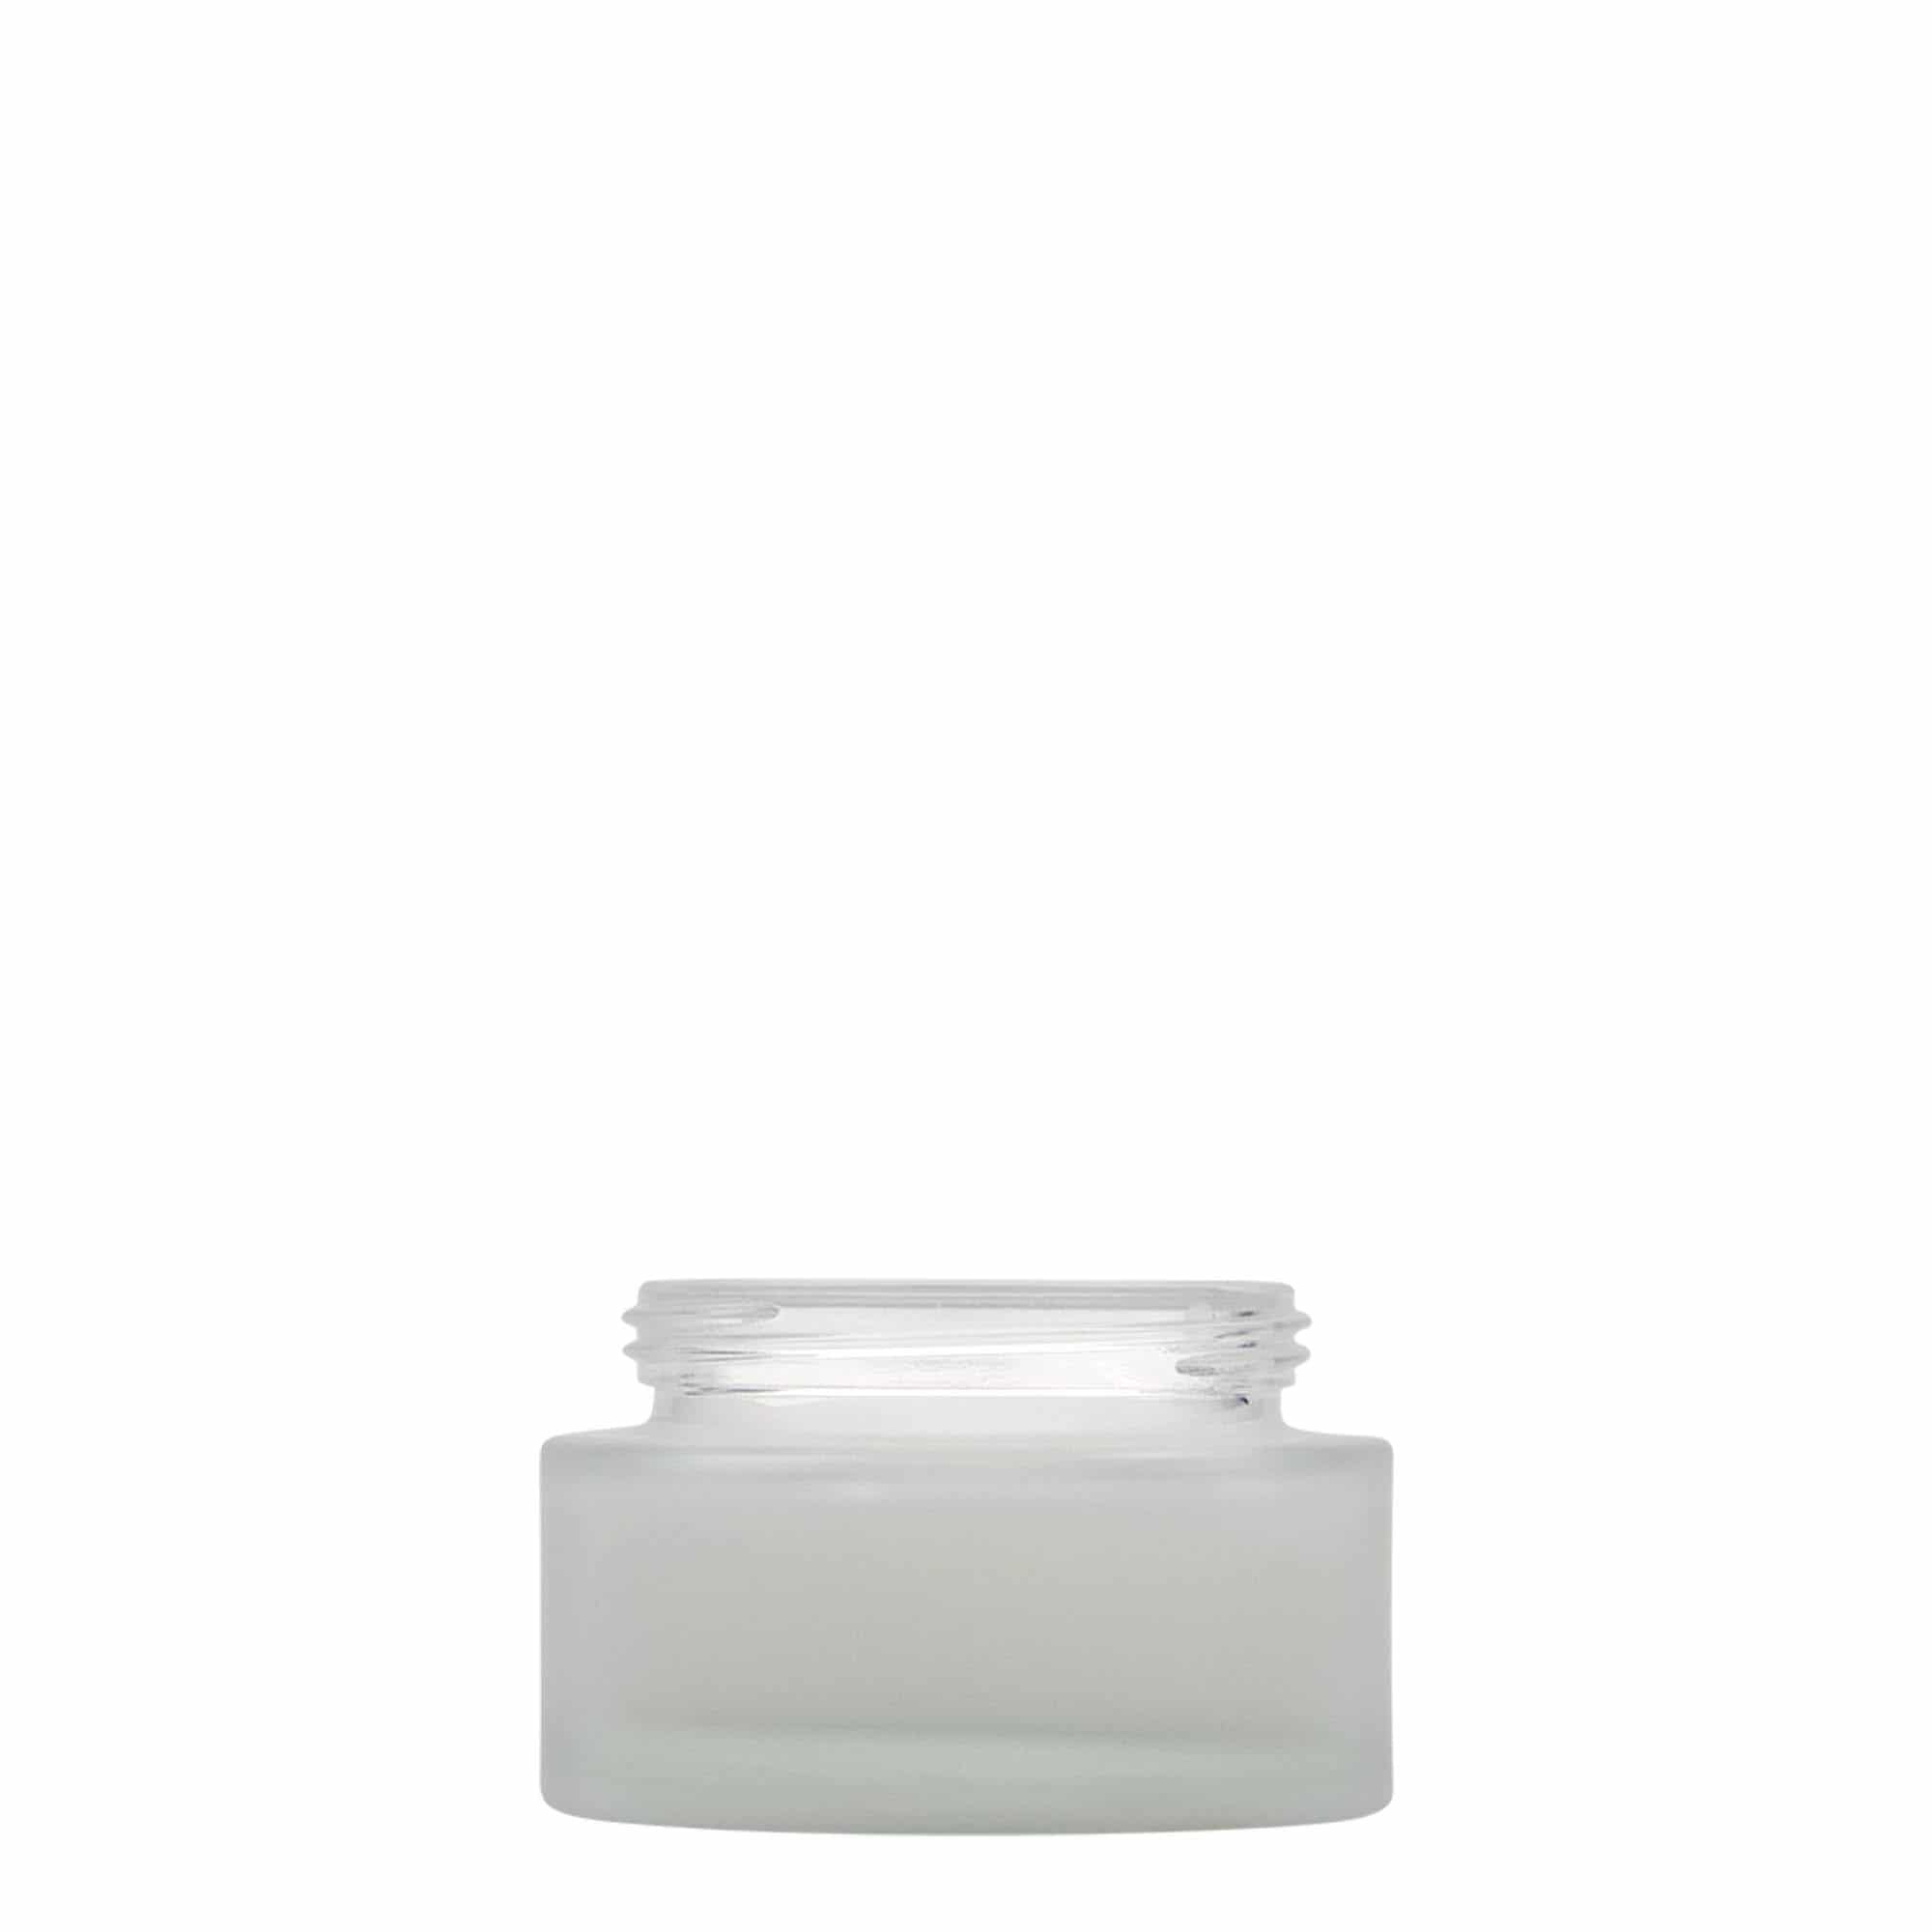 50 ml cosmetic jar 'Platin Edition', glass, frosted, closure: screw cap